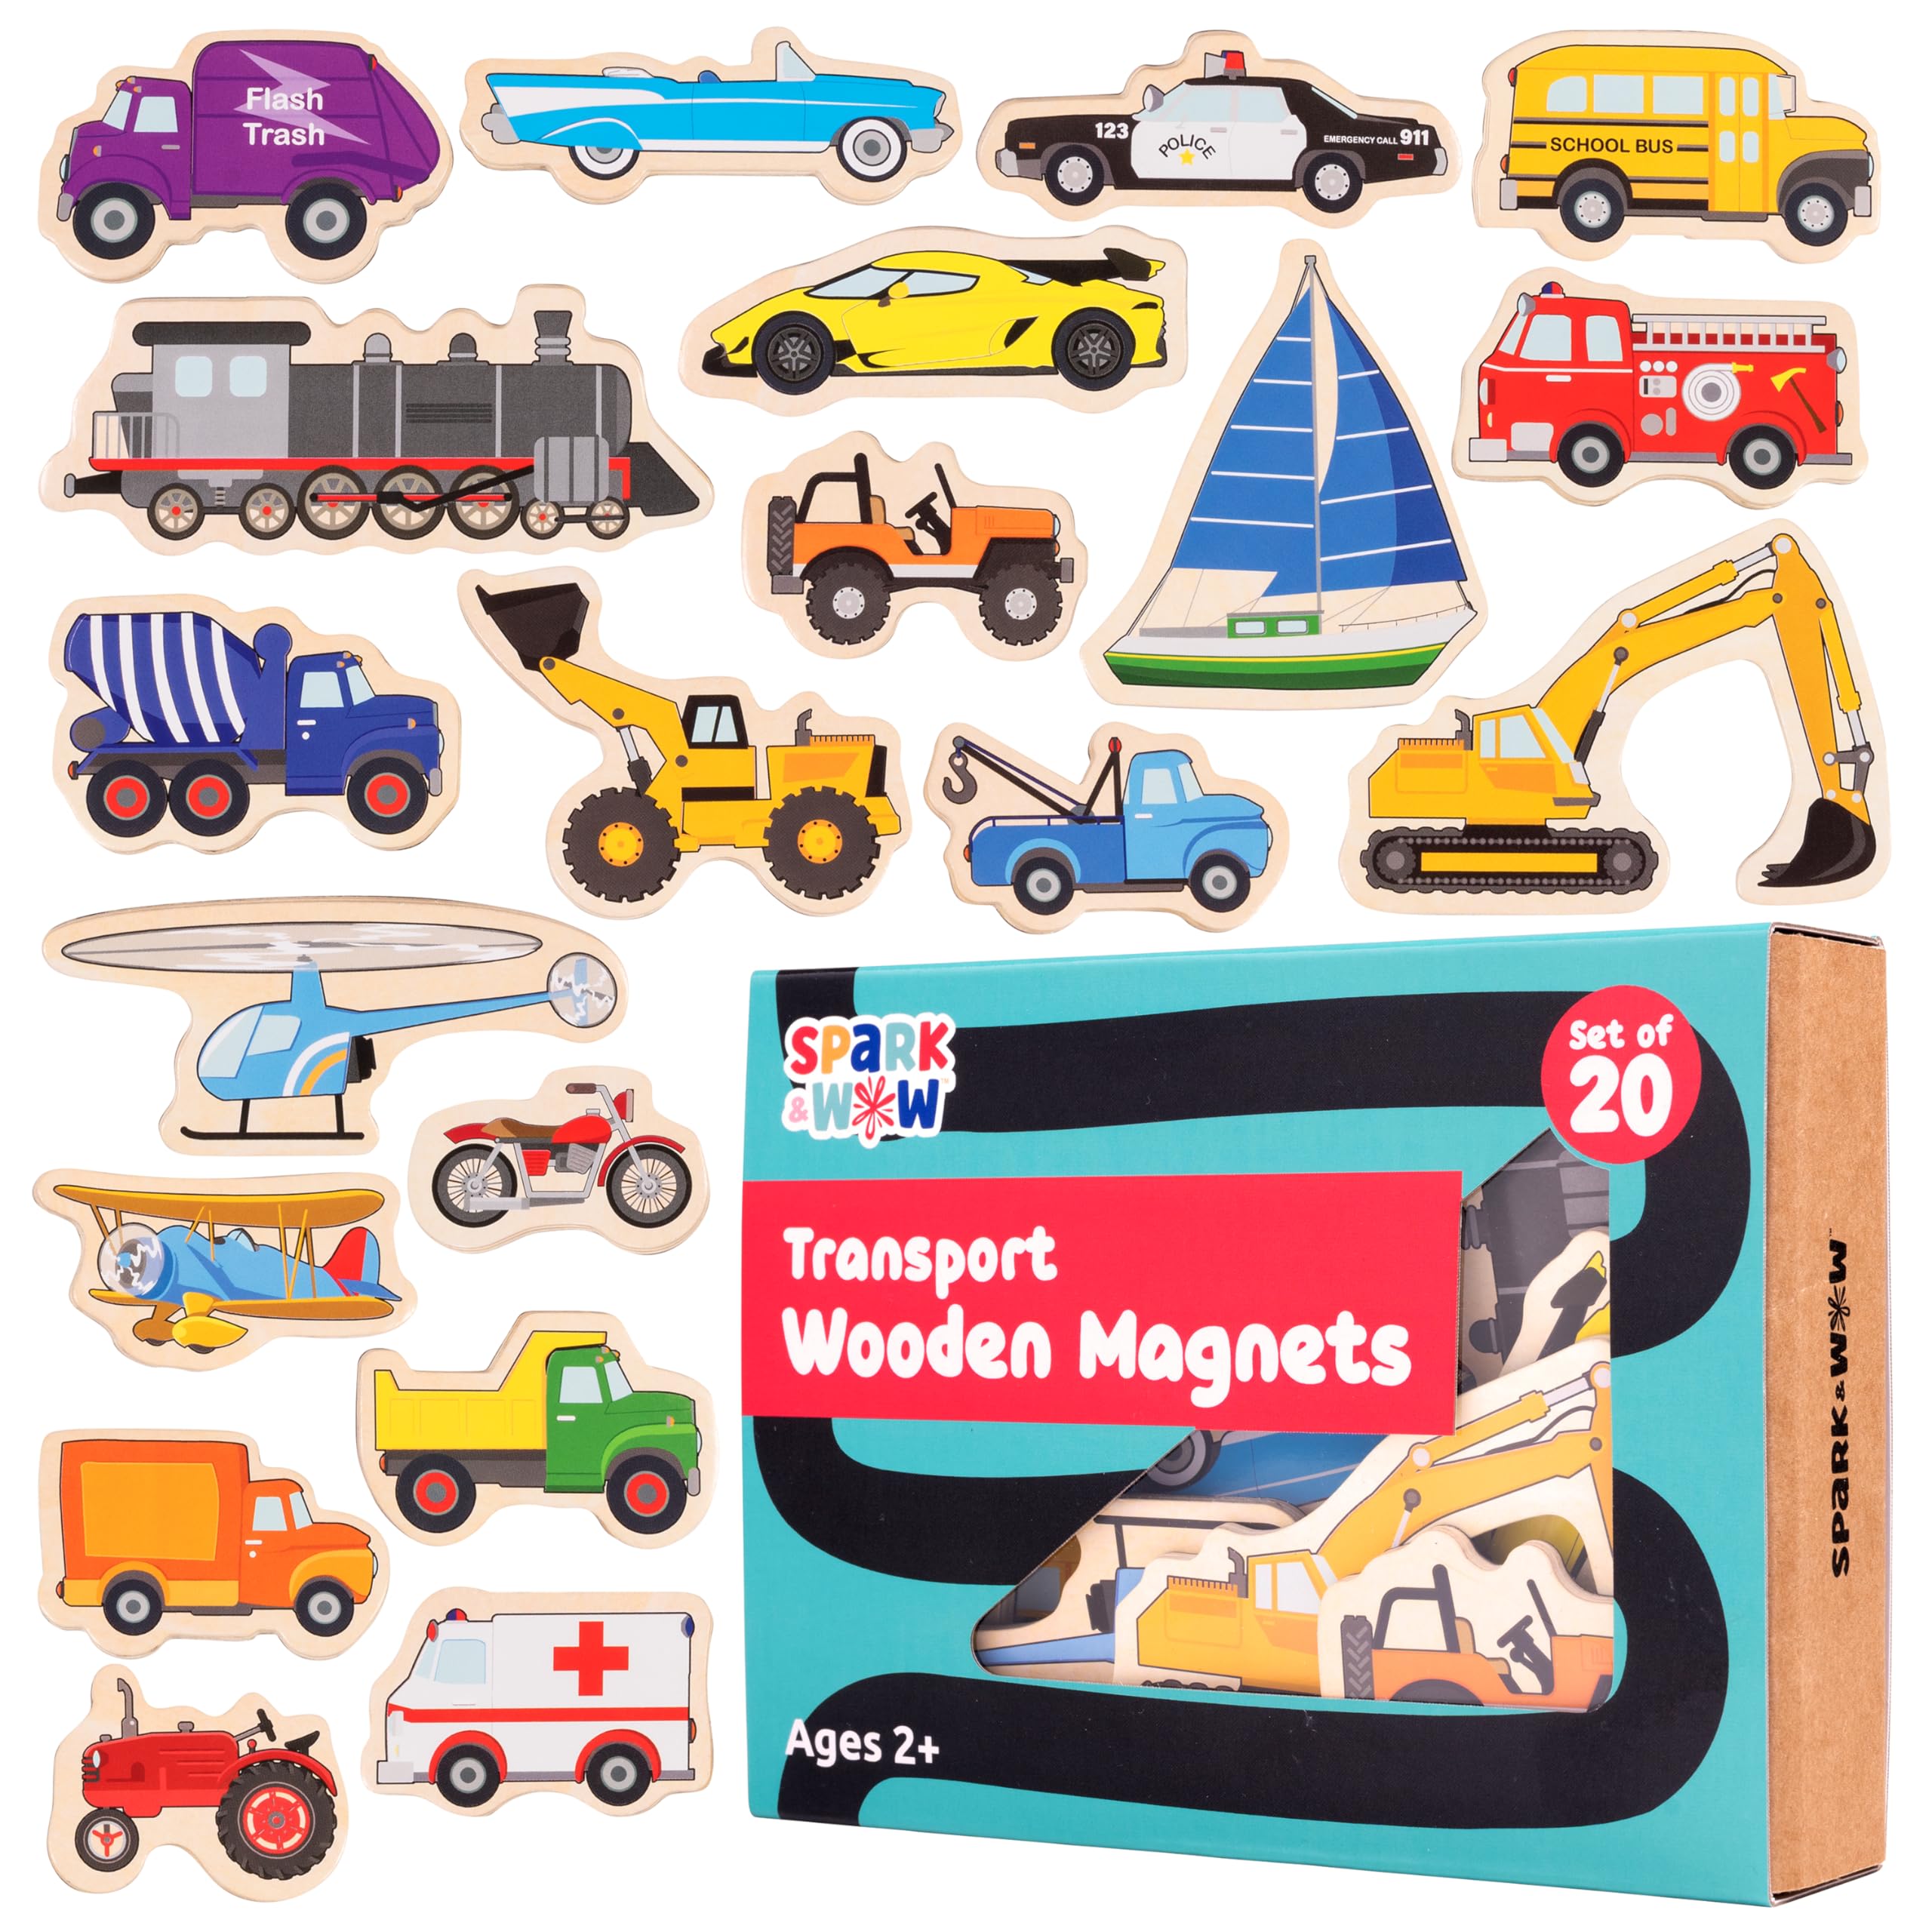 SPARK & WOW Wooden Magnets - Transport - Set of 20 - Magnets for Kids Ages 2+ - Cute Transportation Magnets for Fridges, Whiteboards and More